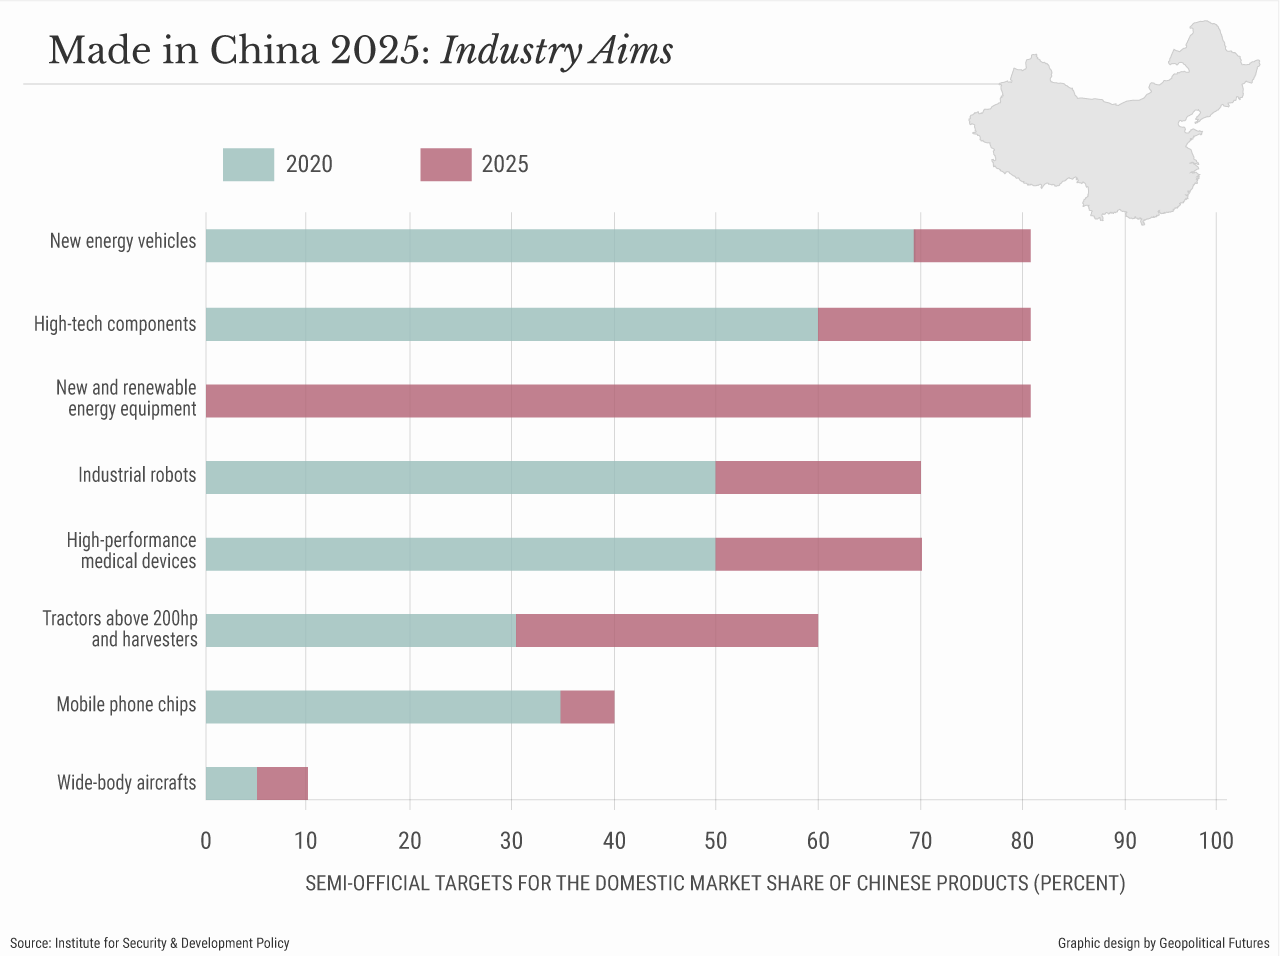 Made in China 2015: Industry Aims